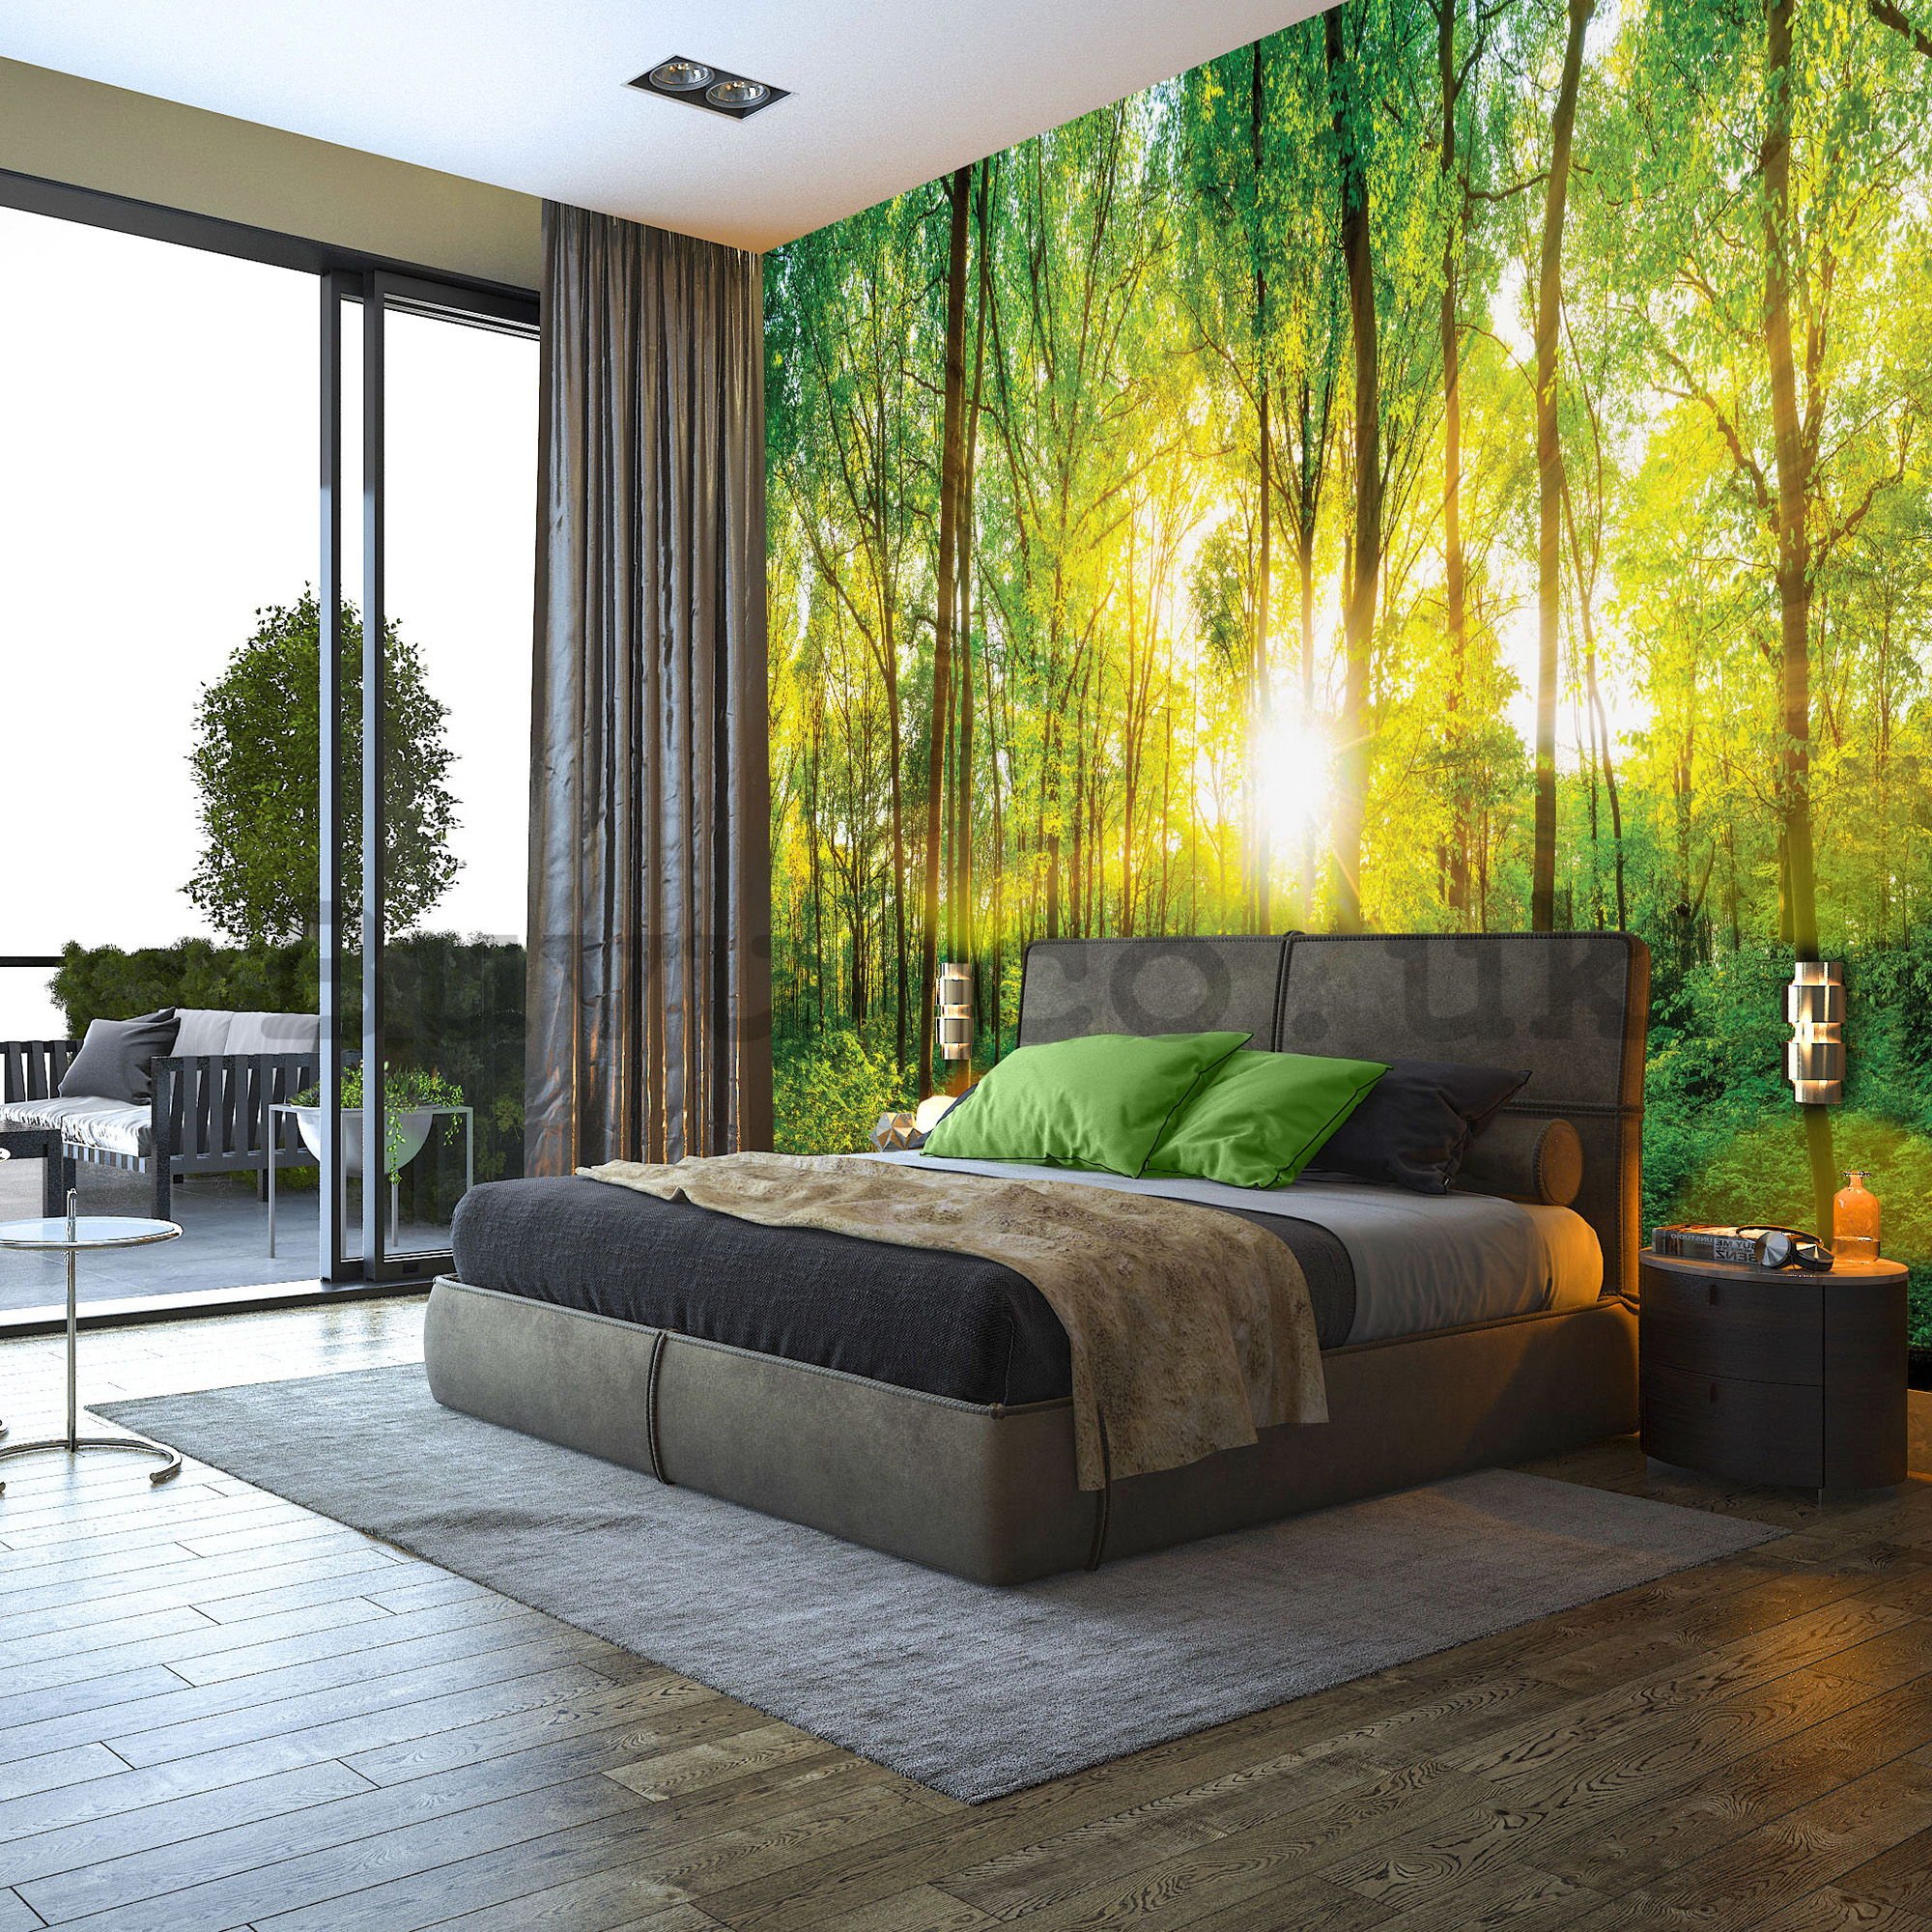 Wall mural: View through the forest - 184x254 cm